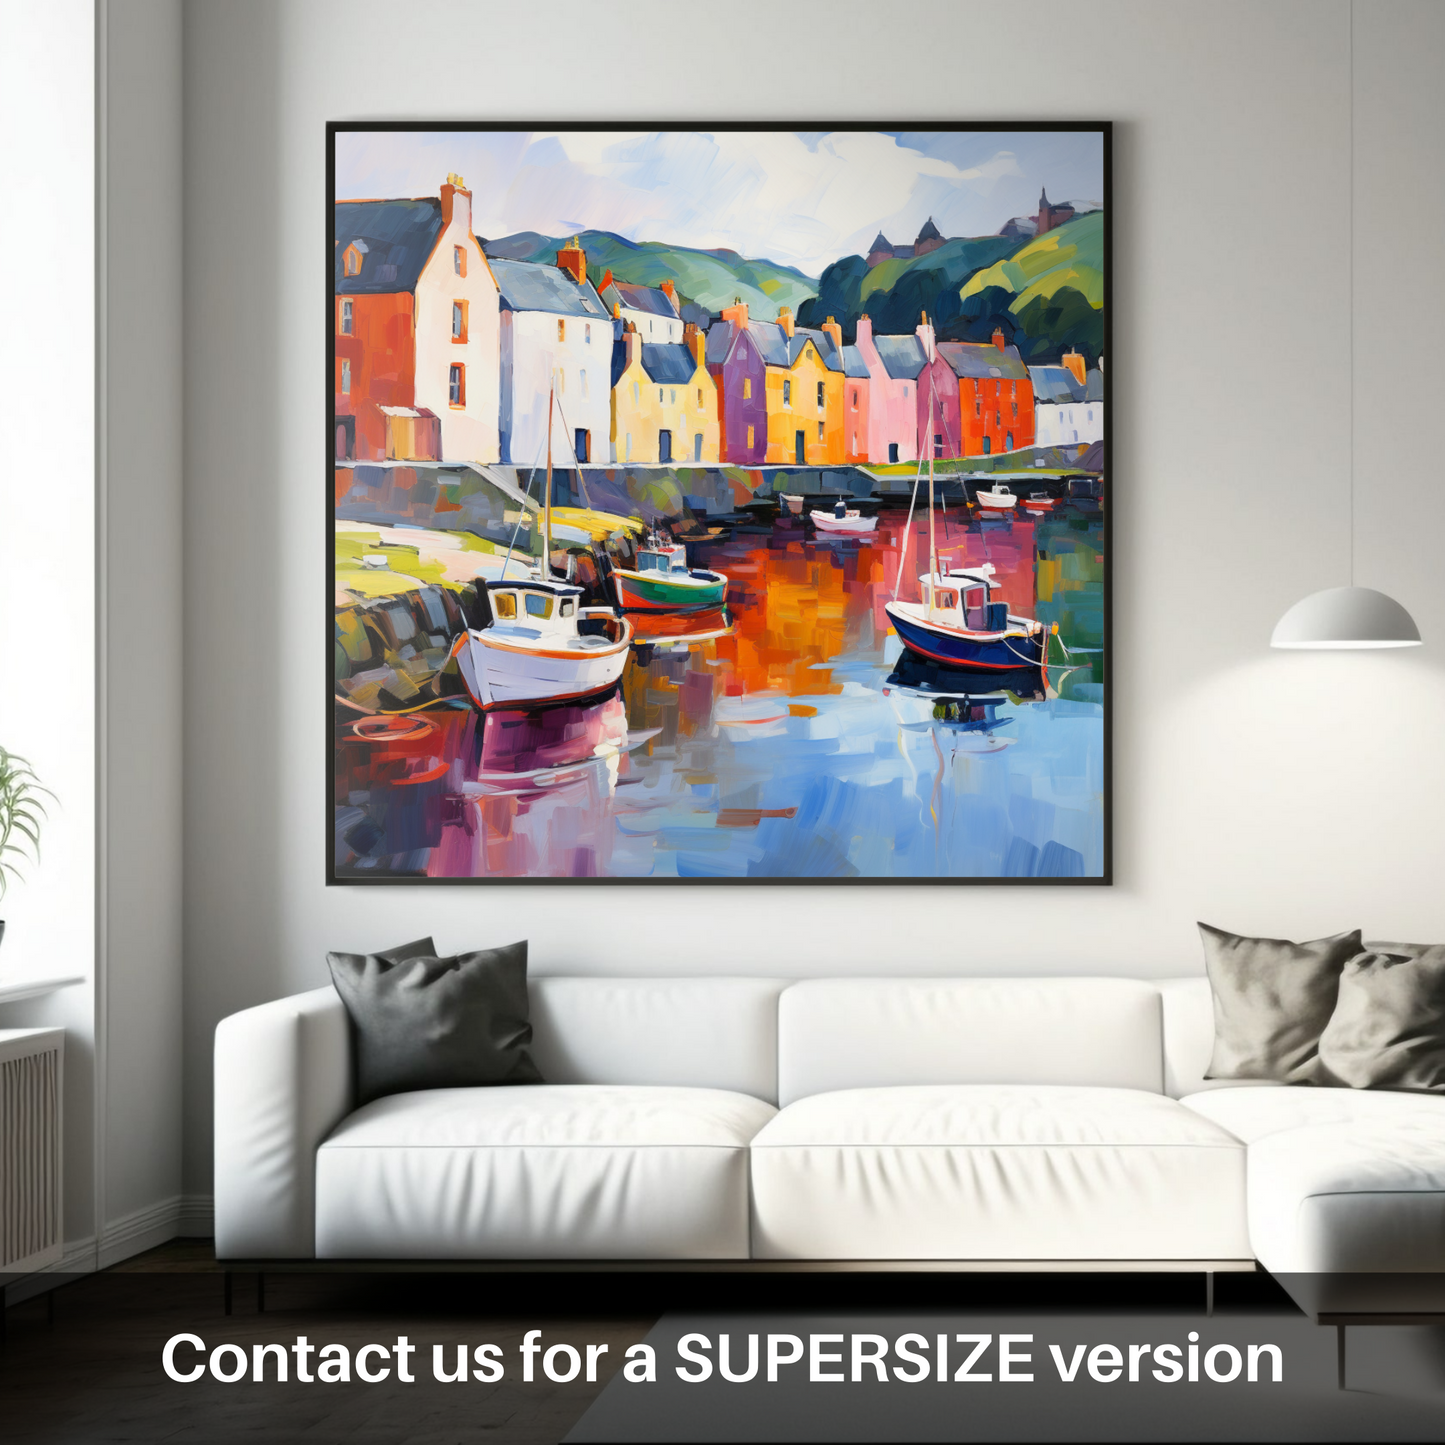 Vibrant Portree: A Fauvist Ode to Scottish Harbour Life